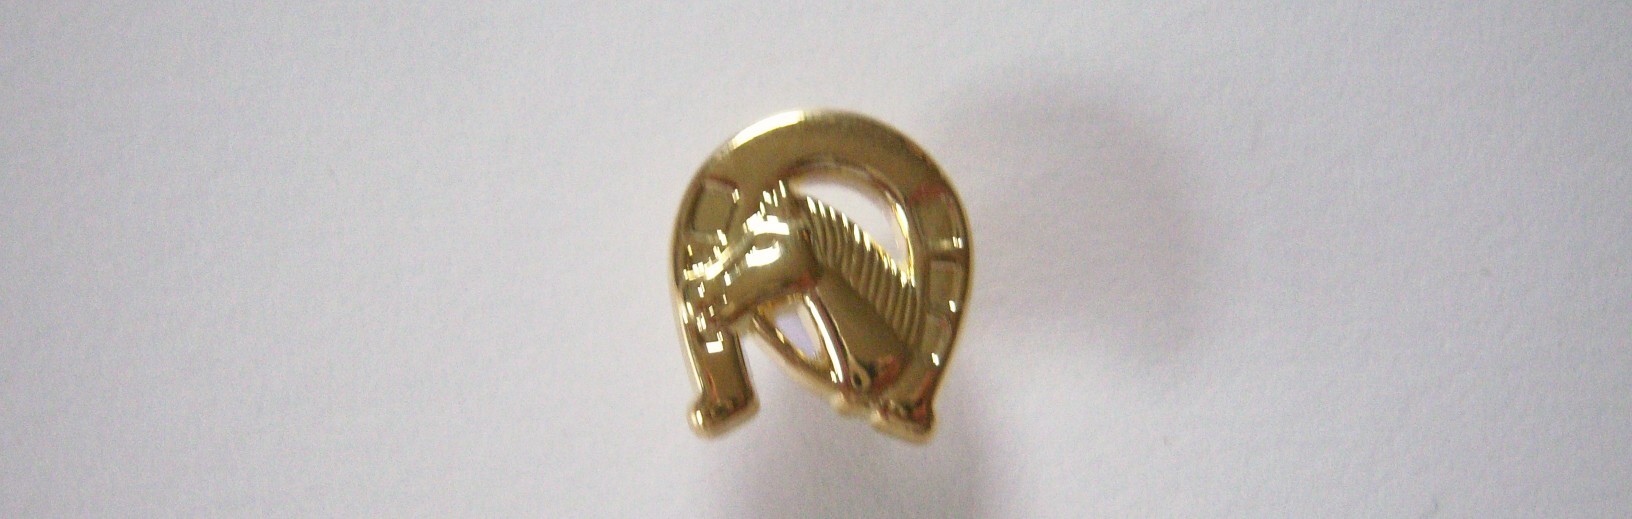 HB Gold Plastic Horseshoe with left facing side horse head, neck and mane inside 3/4" Shank Back Nylon Button